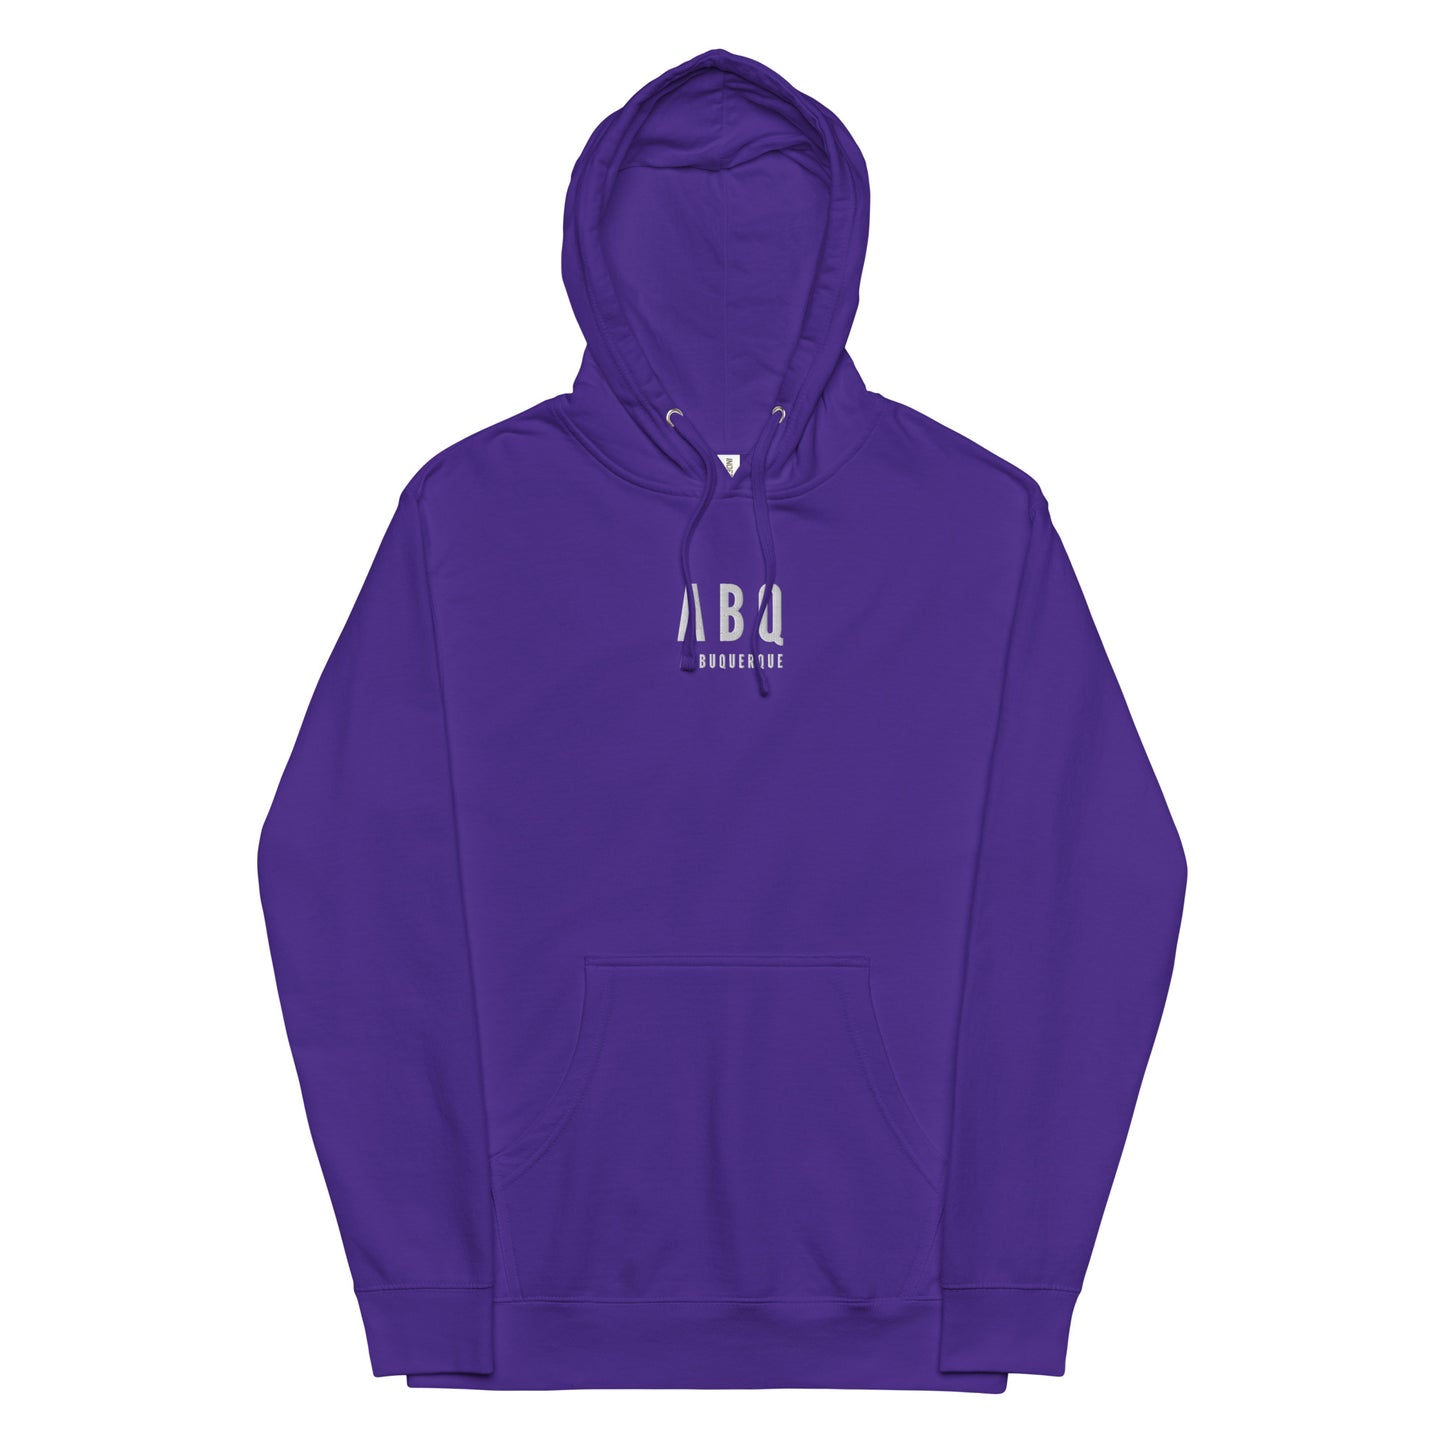 City Midweight Hoodie - White • ABQ Albuquerque • YHM Designs - Image 12